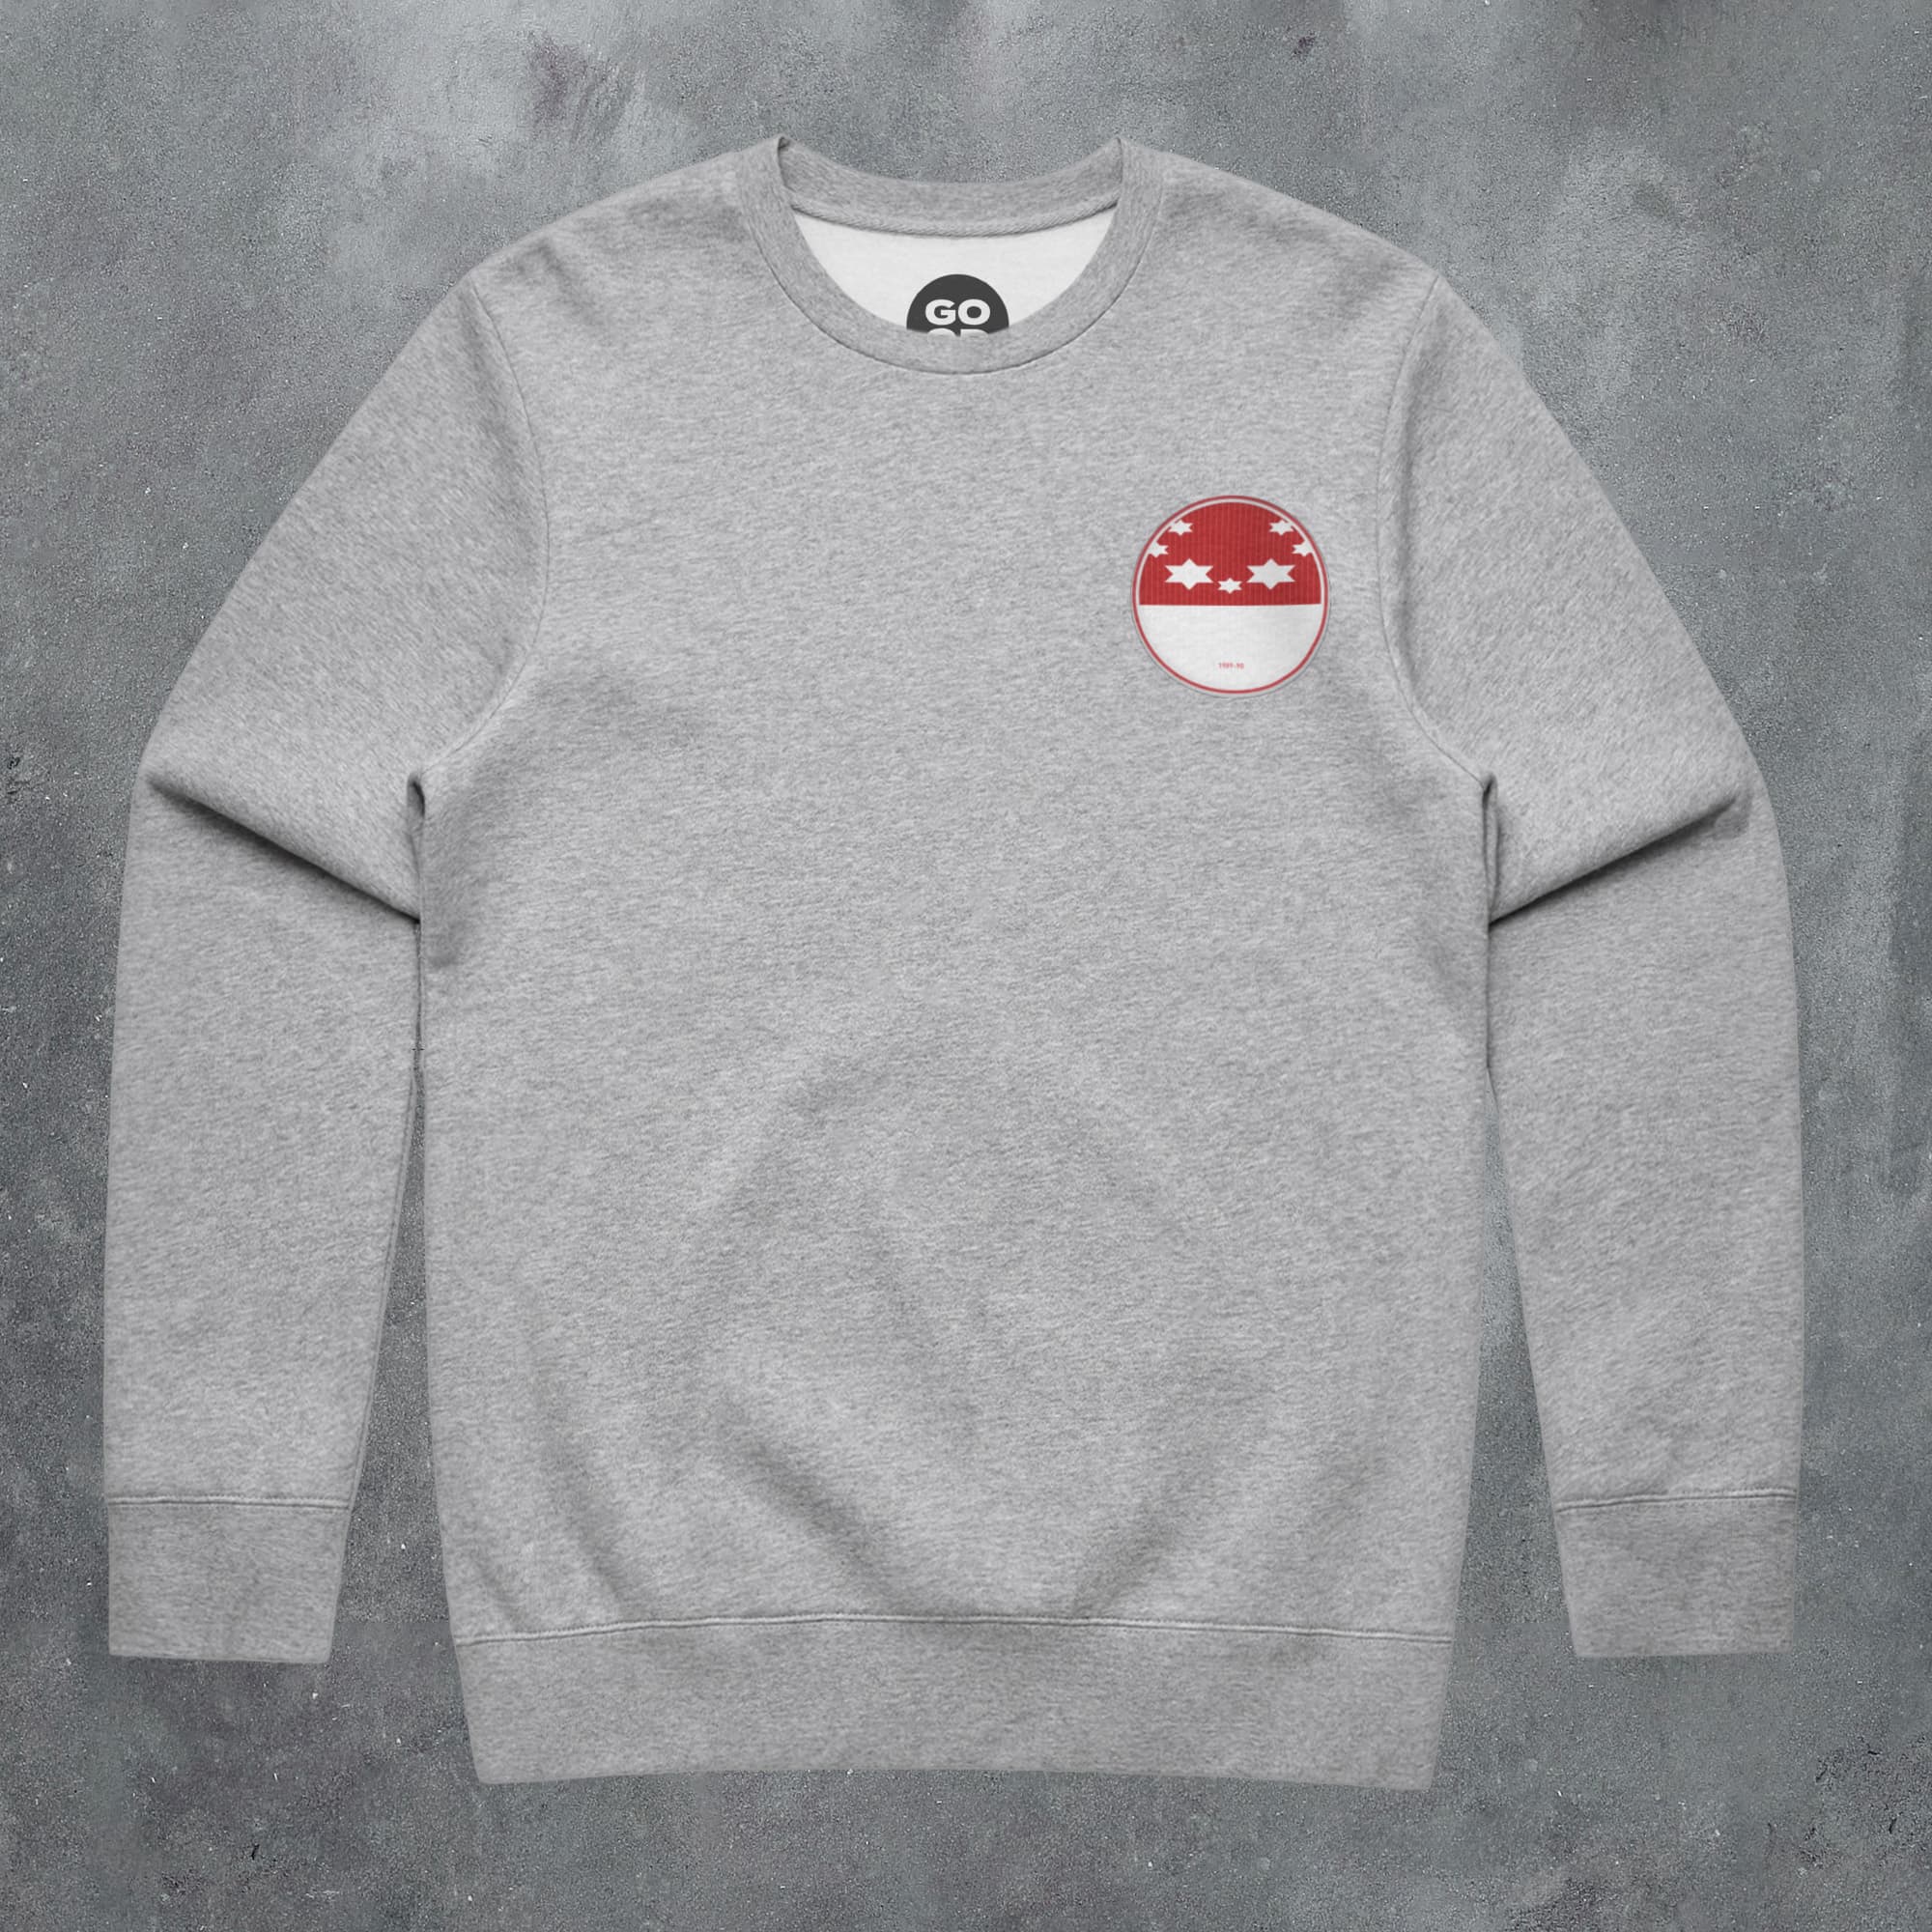 a grey sweatshirt with a red and white patch on the chest